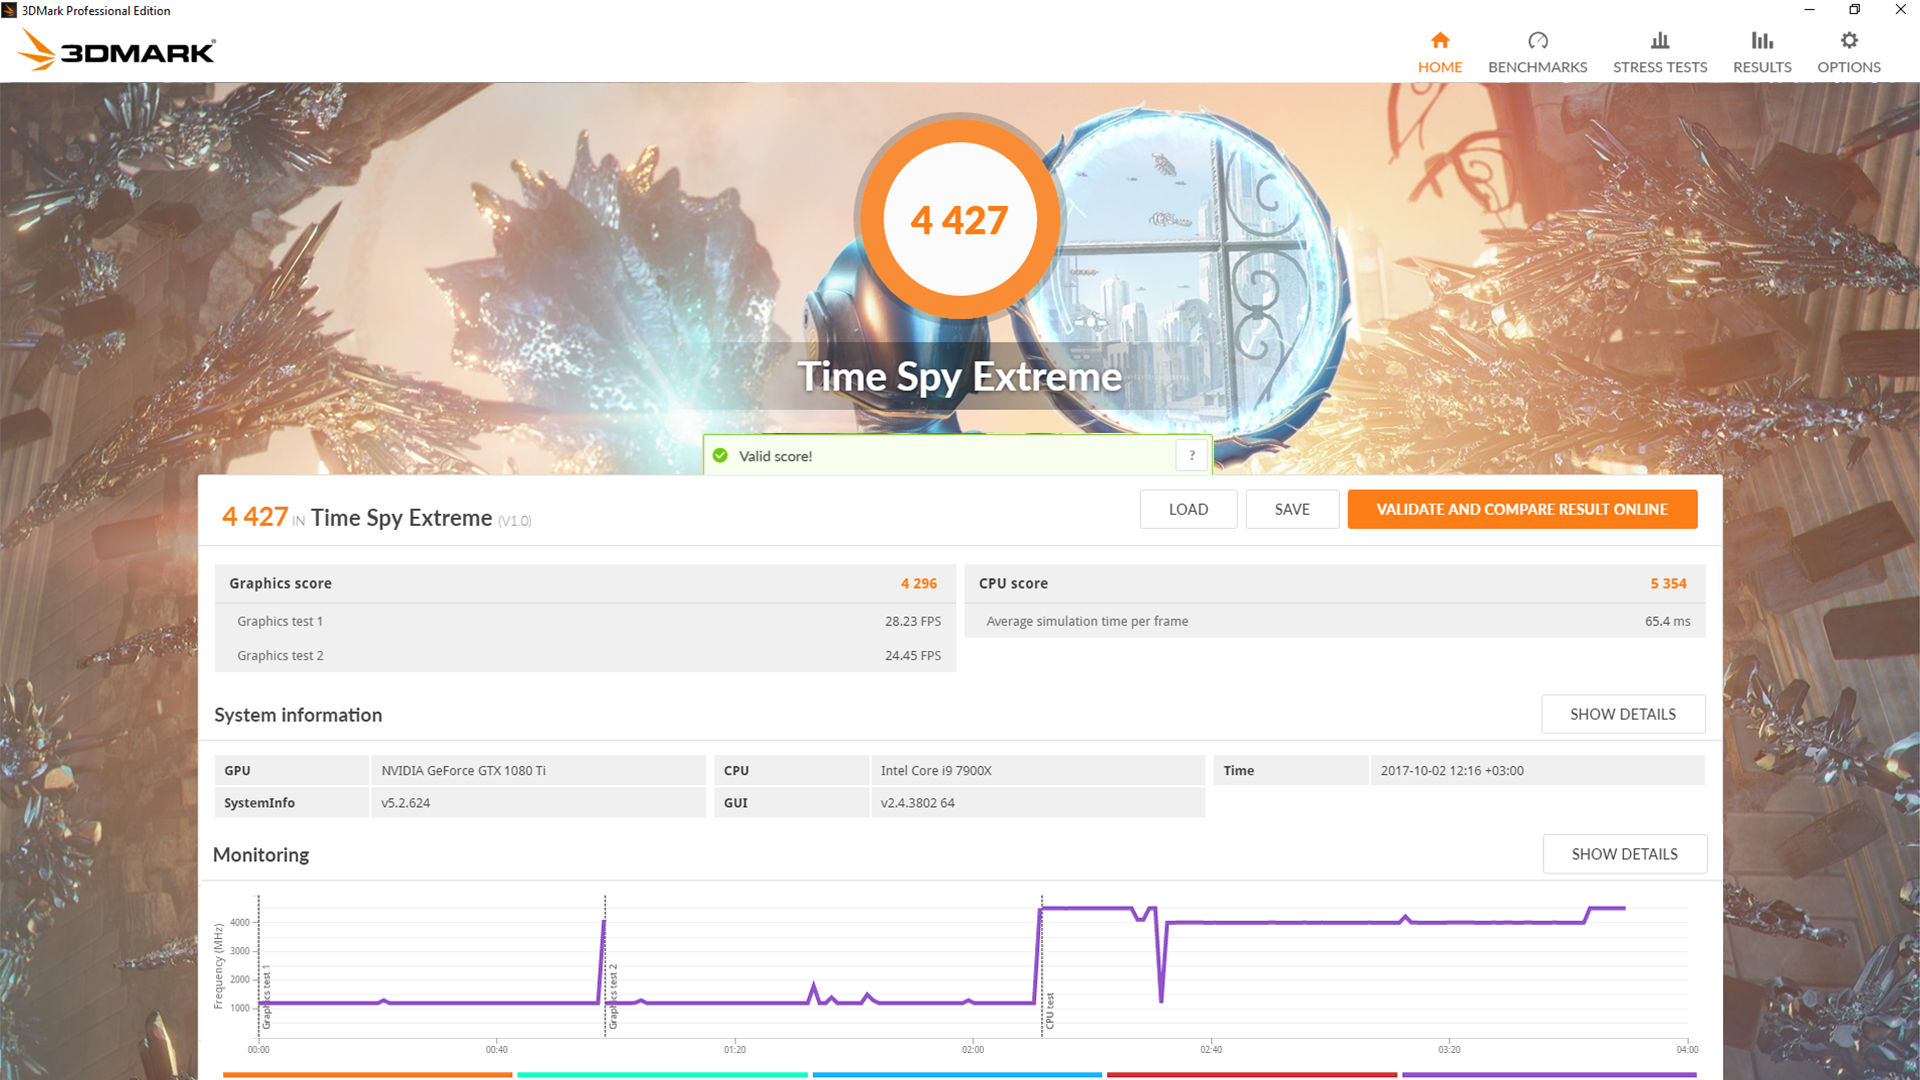 Looking At DirectX 12 Performance - 3DMark API Overhead Feature